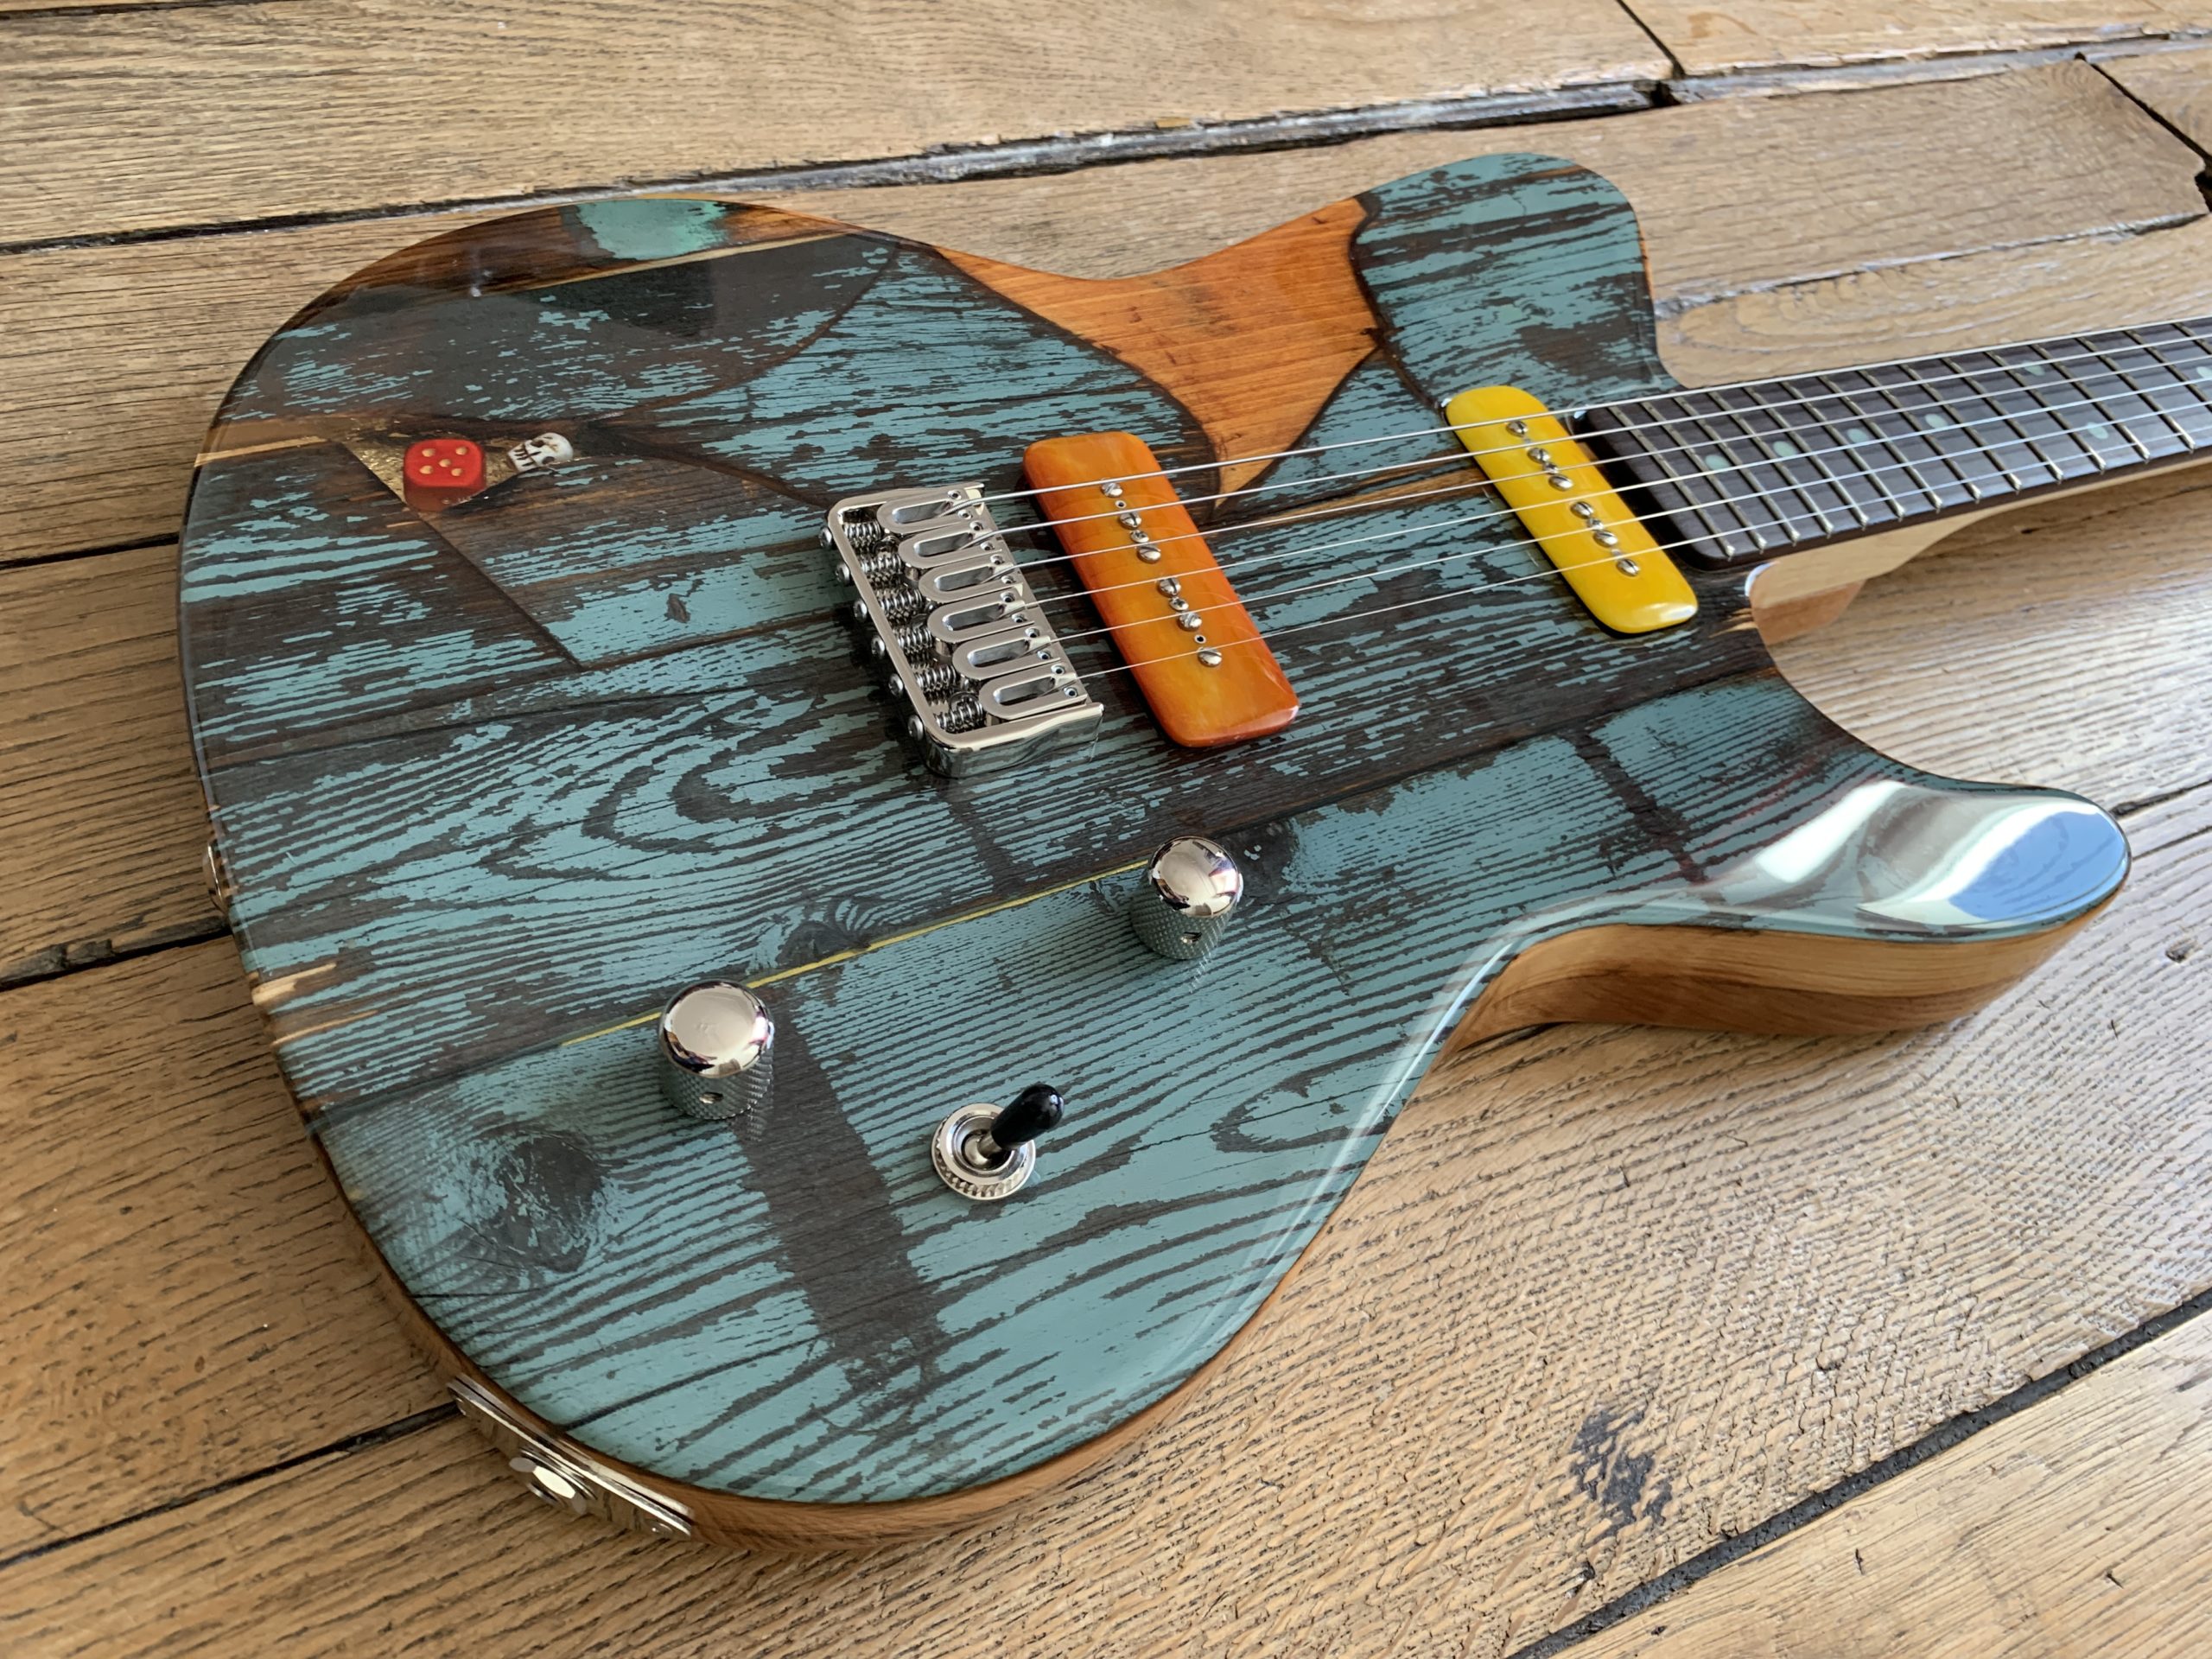 Gate Guitar #047 from Spalt Instruments, a piece of art guitar you must play!